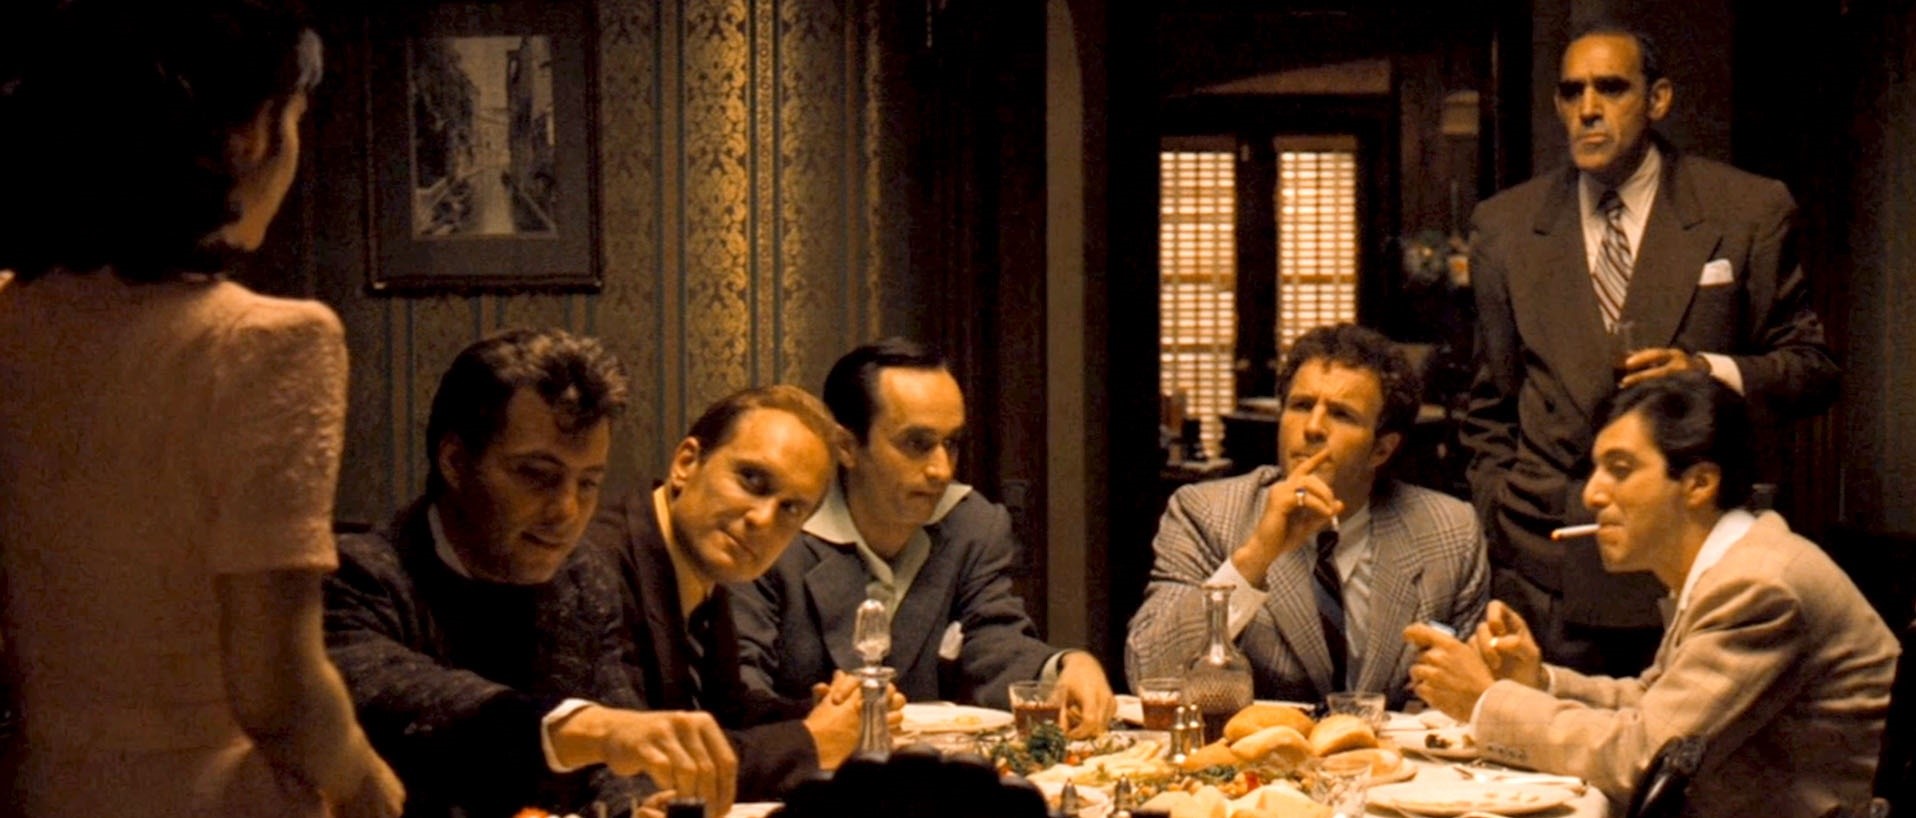 Sky Room Talk – Made Men and Mobsters – The Mafia in the Movies